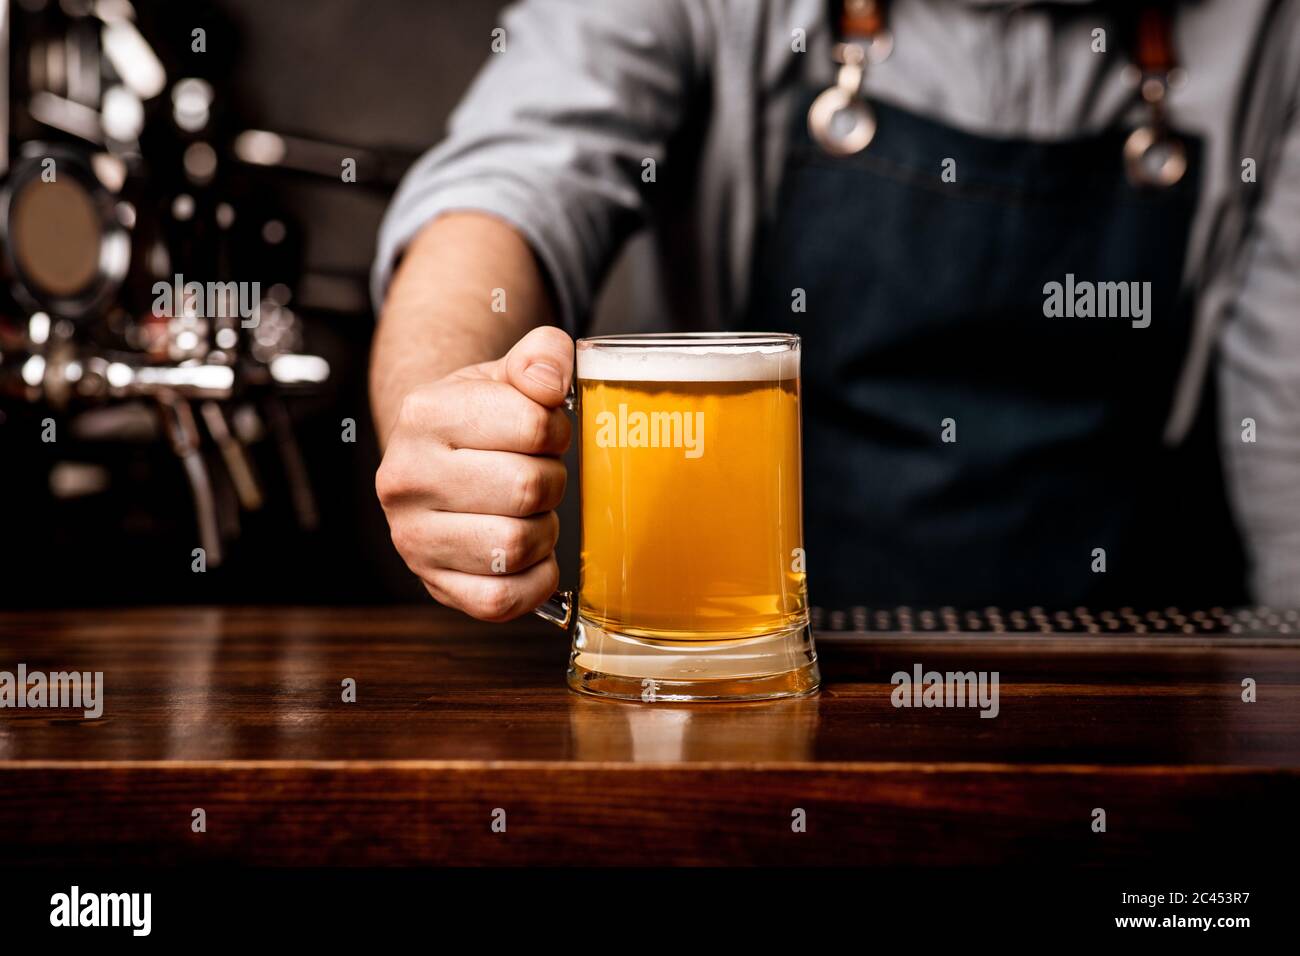 Barman in apron serves beer in glass mug on wooden bar counter Stock Photo